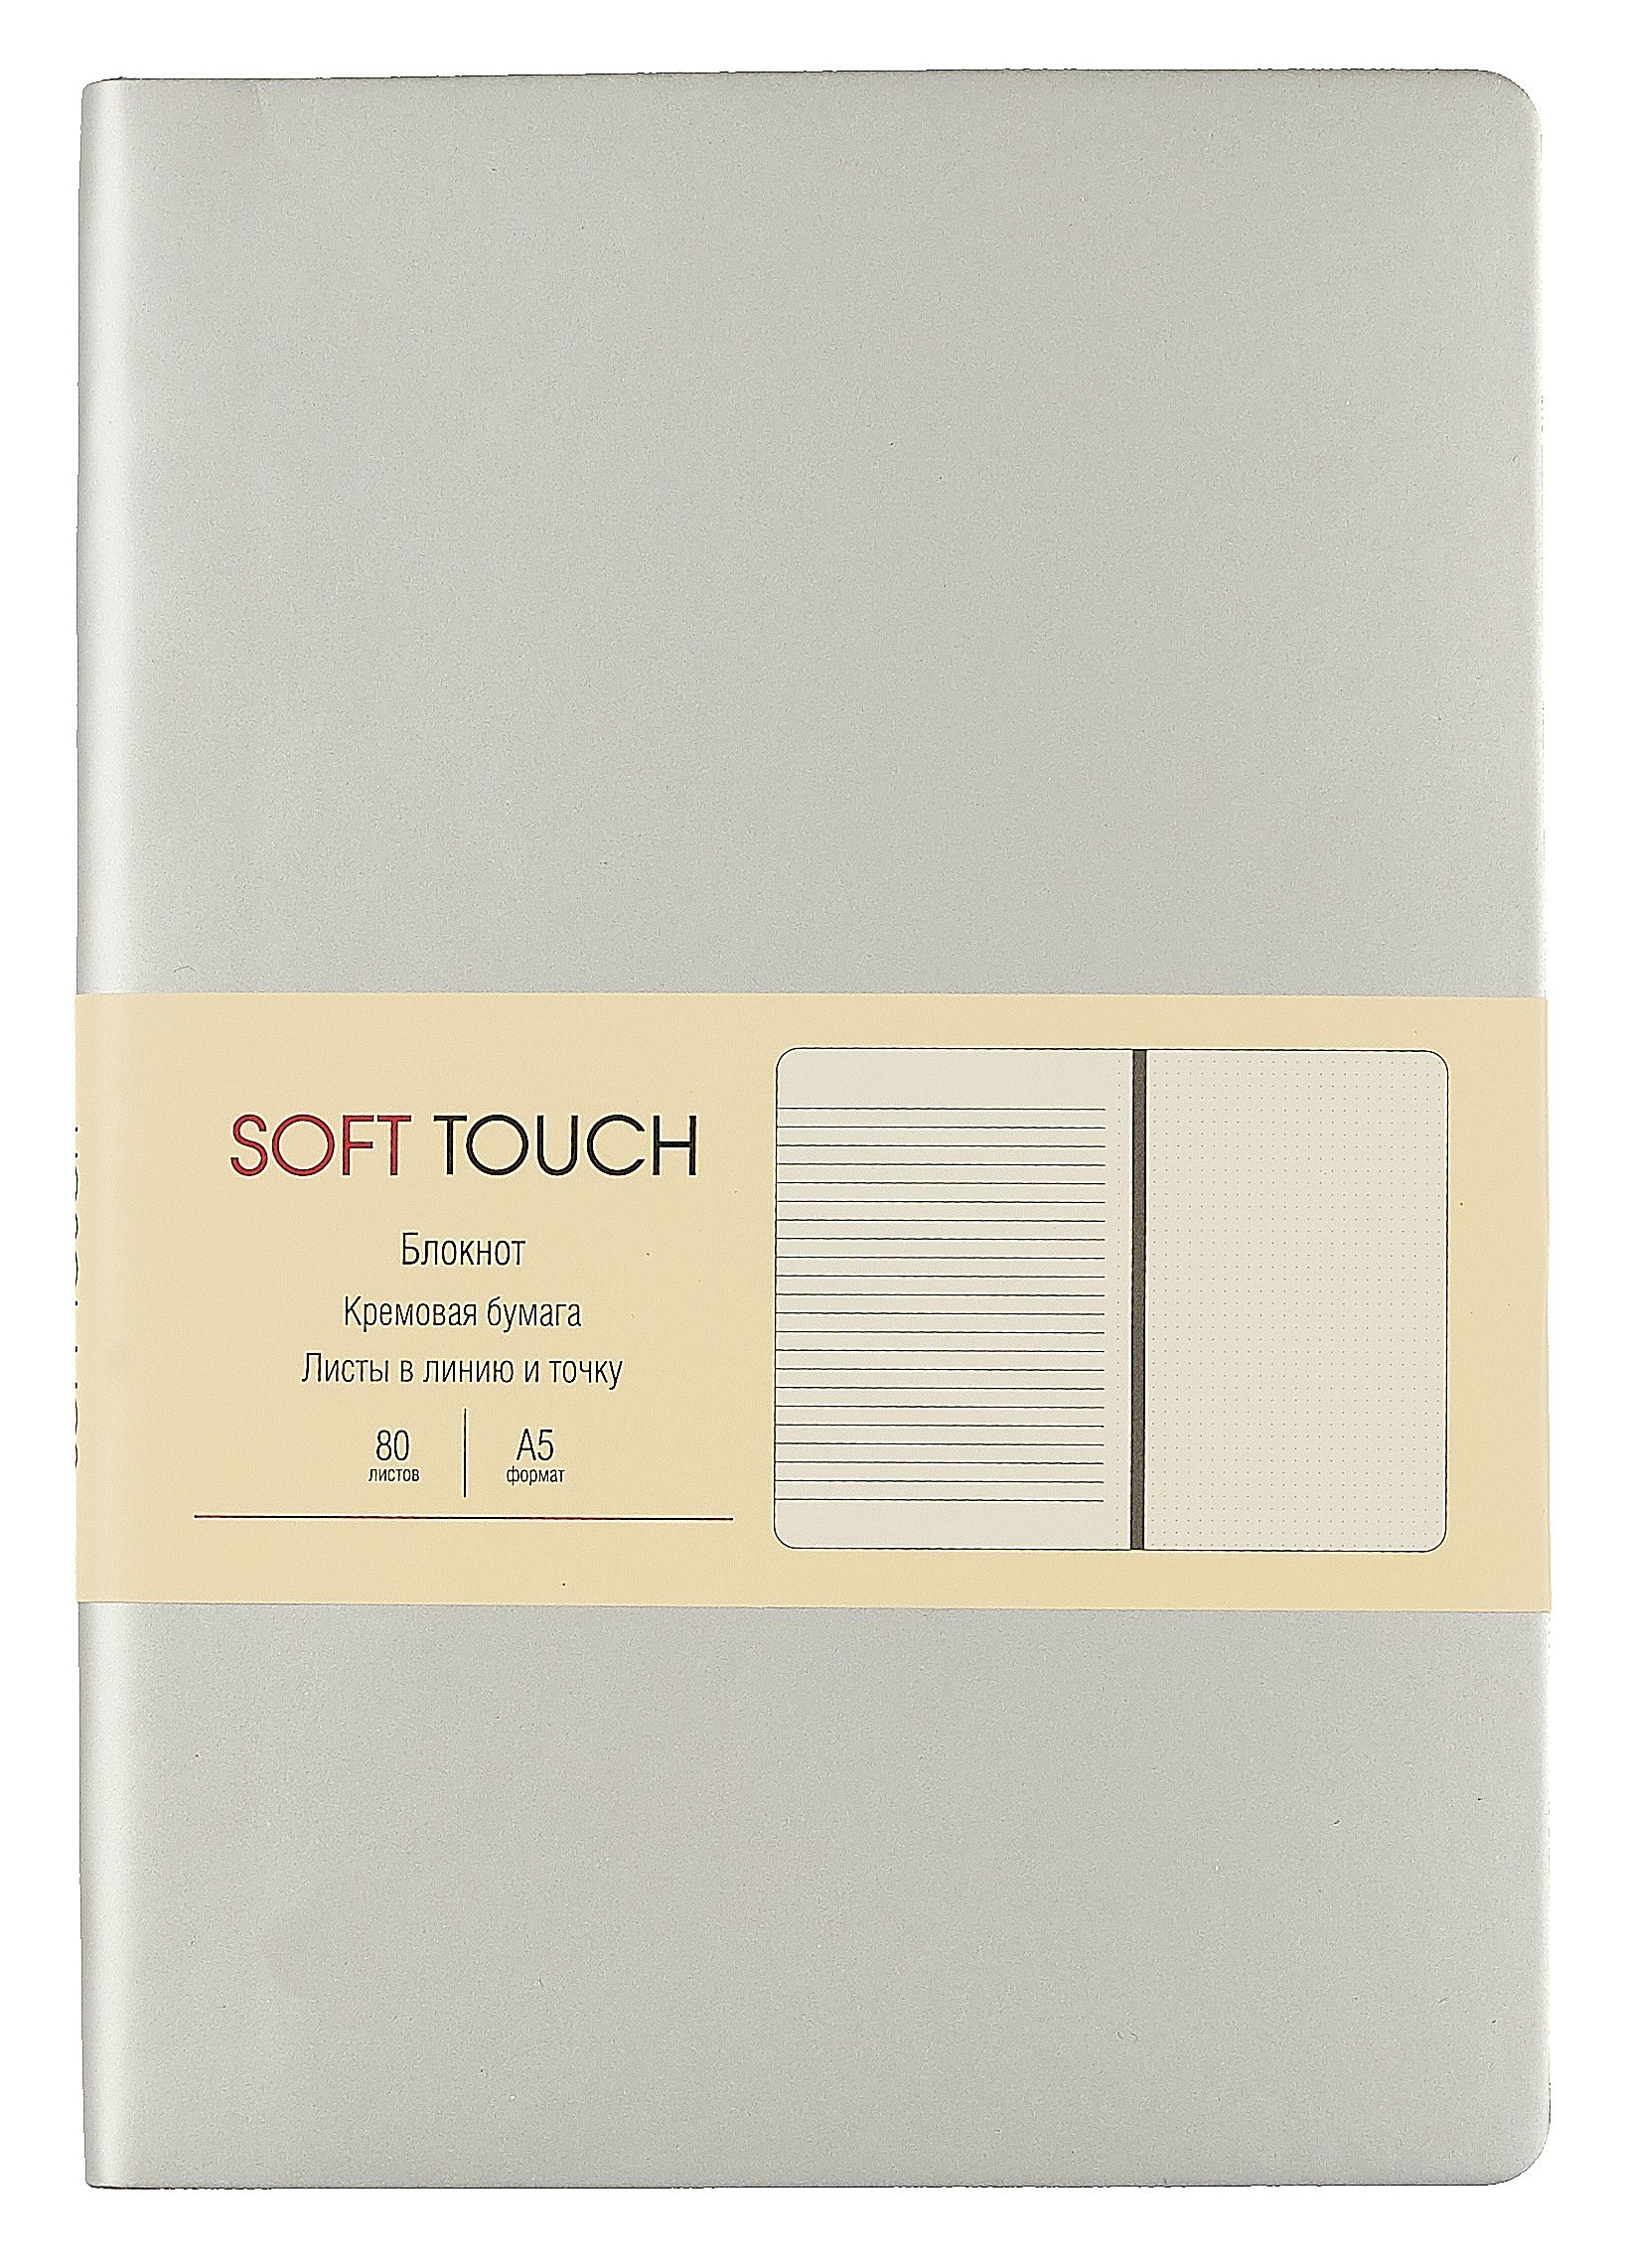    5 80  SOFT TOUCH.   .., .,  70/2, .. ( ., ,  .), ., ., ., ,  